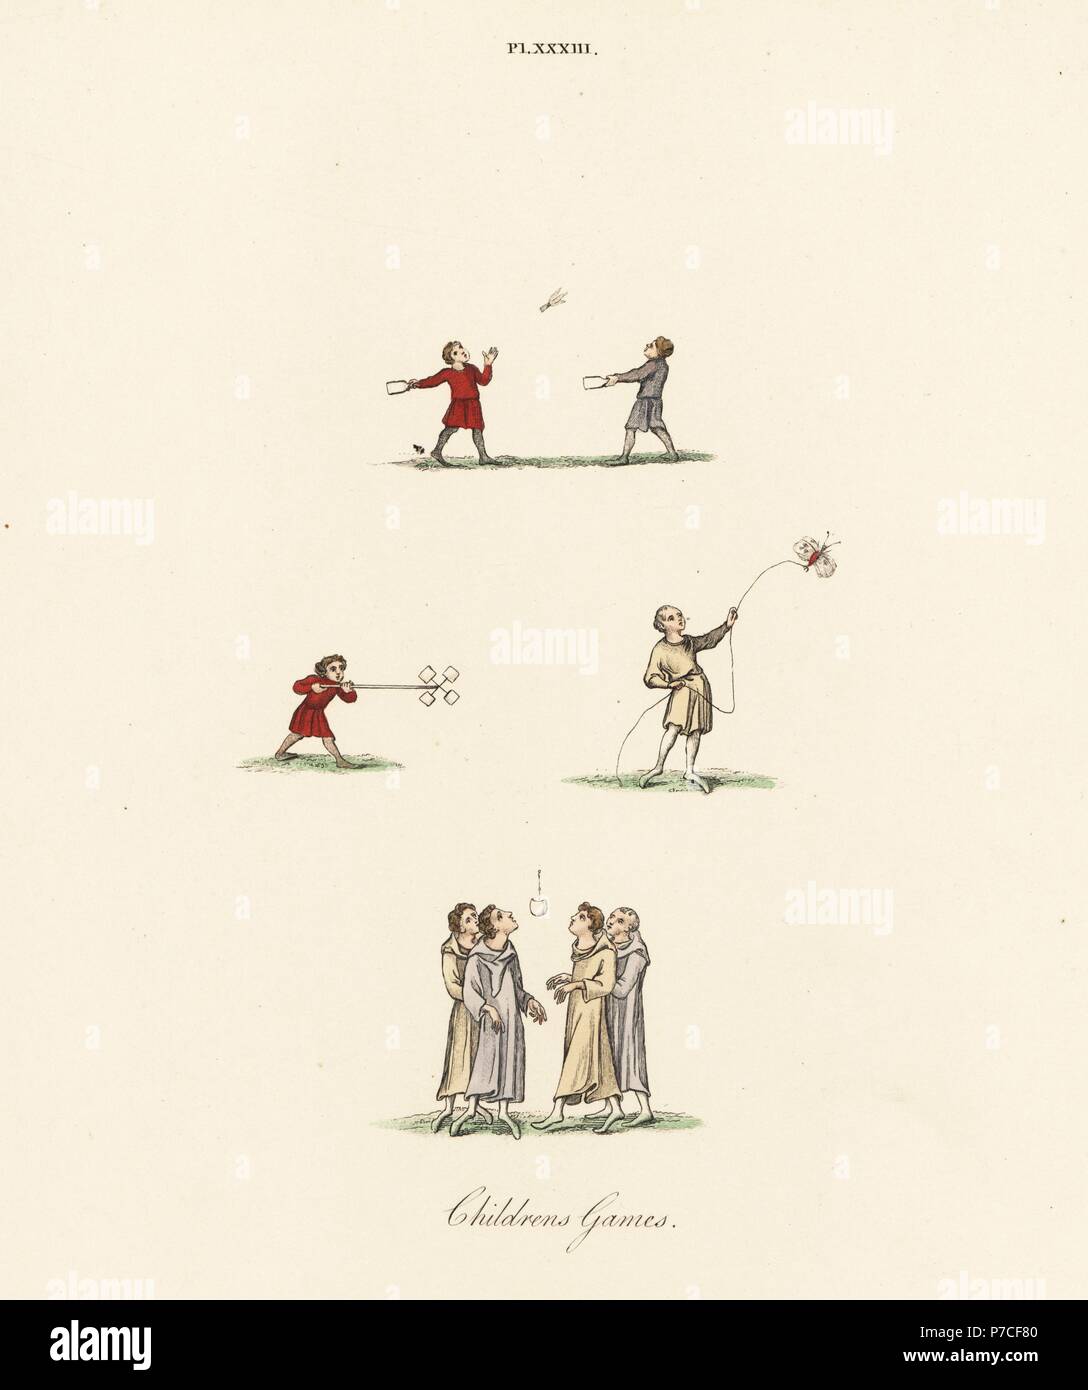 Medieval children's games: badminton with racquets and shuttlecock, boy with paper windmill, boy flying a butterfly on a string, and boys playing bob-cherry with an apple. Handcoloured lithograph by Joseph Strutt from his own Sports and Pastimes of the People of England, Chatto and Windus, London, 1876. Stock Photo